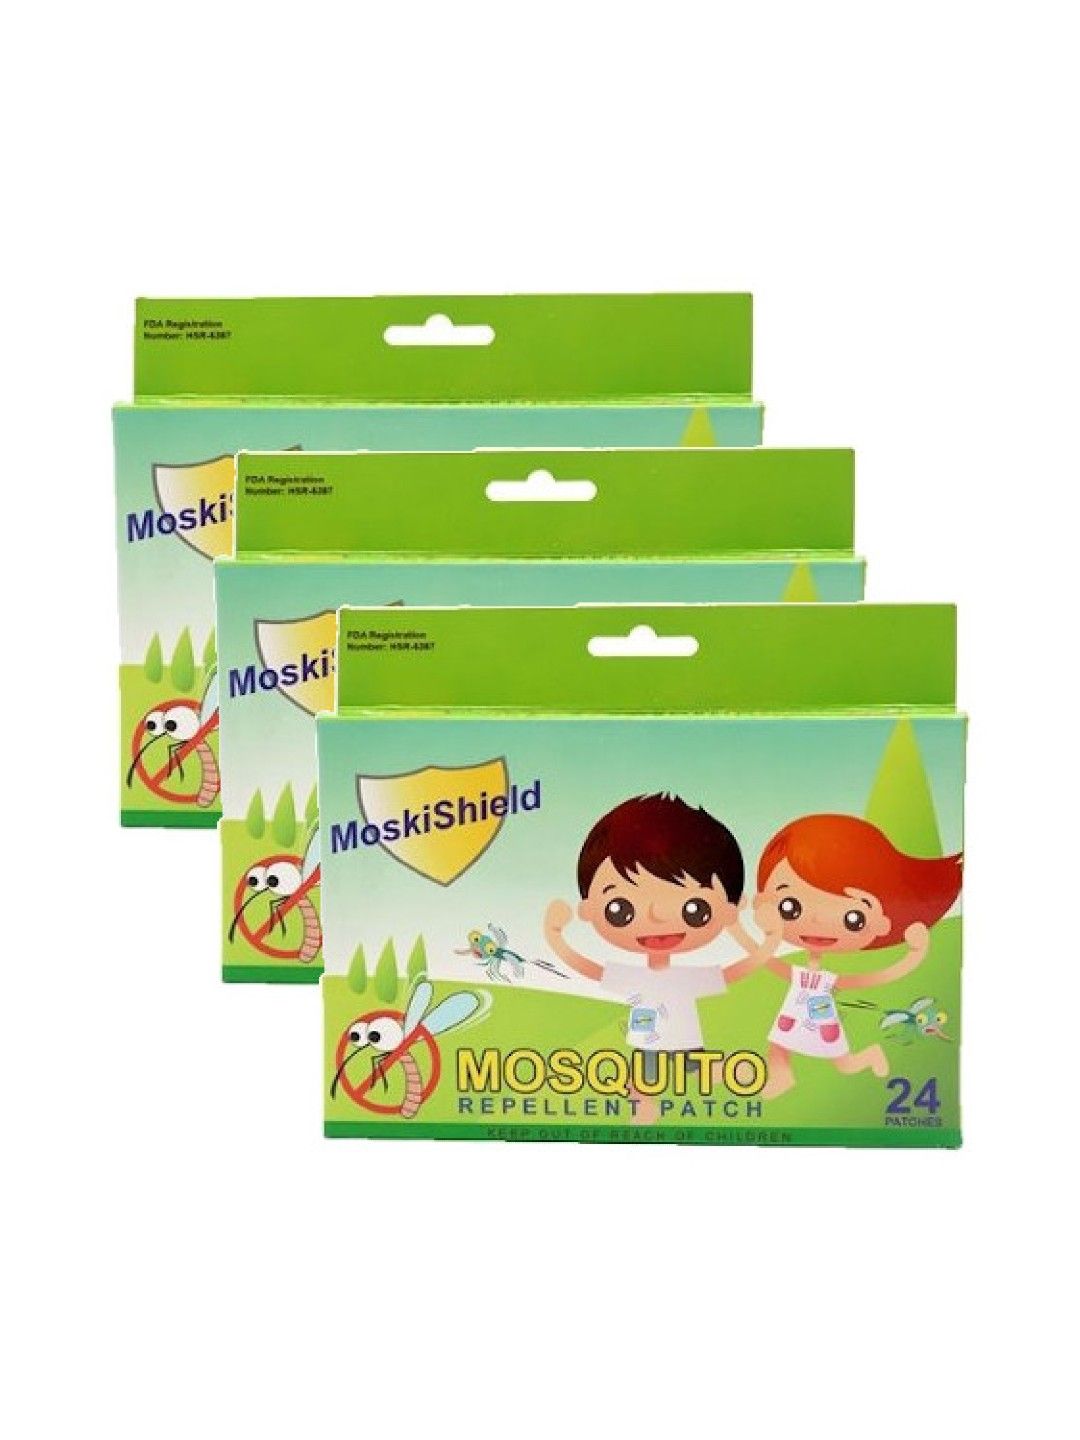 Moskishield Mosquito Repellent Patch (Set of 3) (No Color- Image 1)